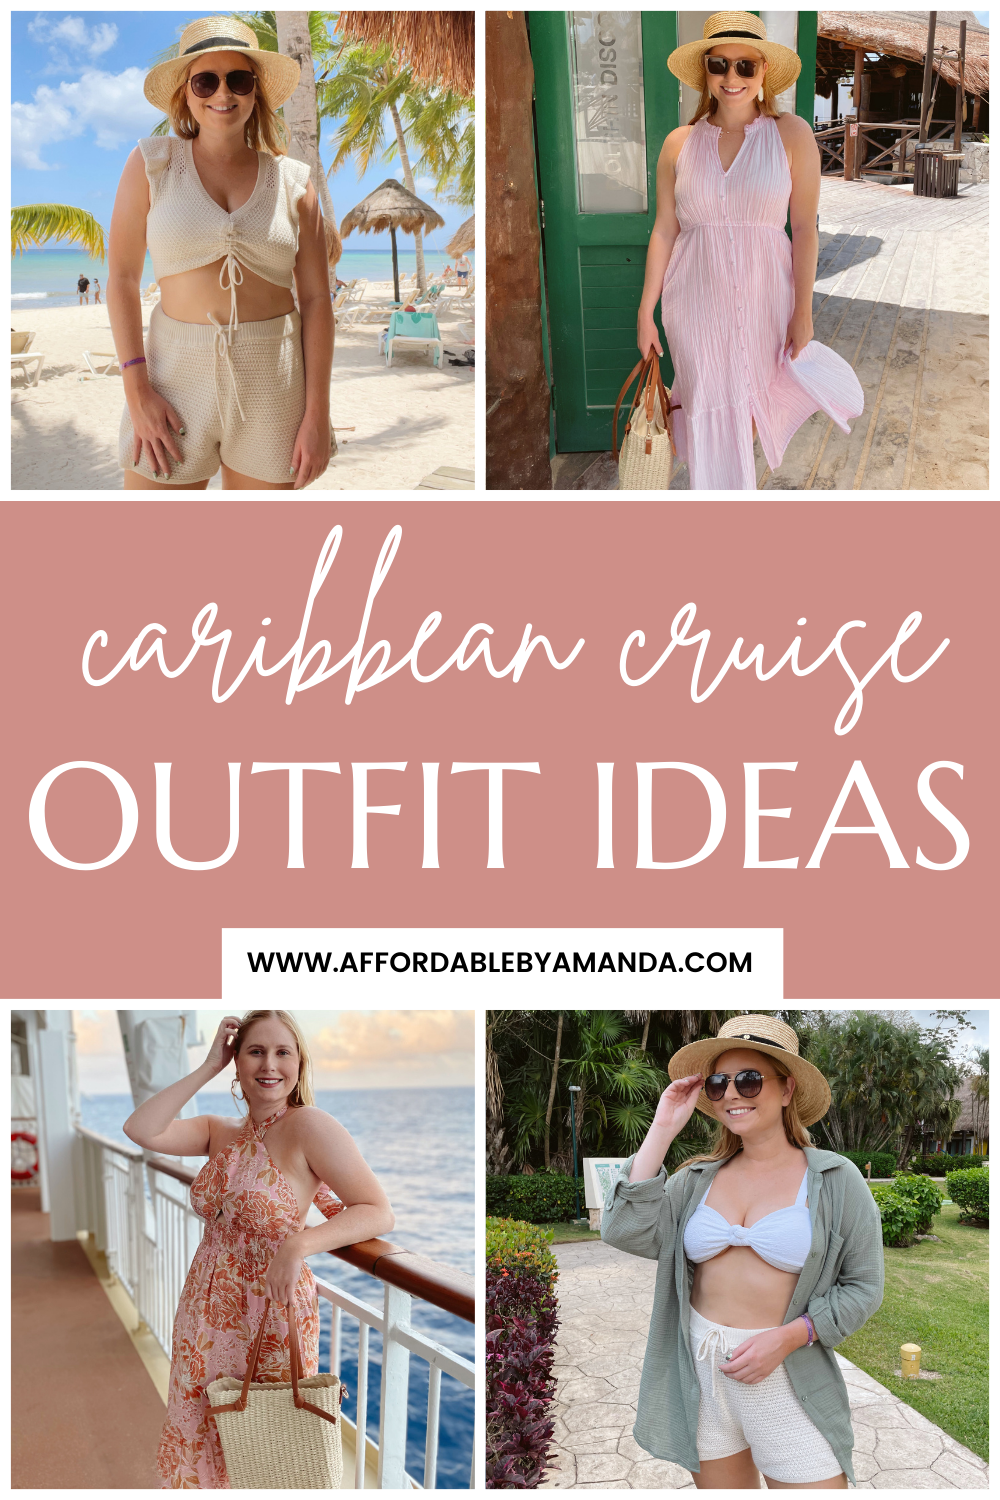 Caribbean Cruise Outfit Ideas 2022 - What Cruising Is Like in 2022